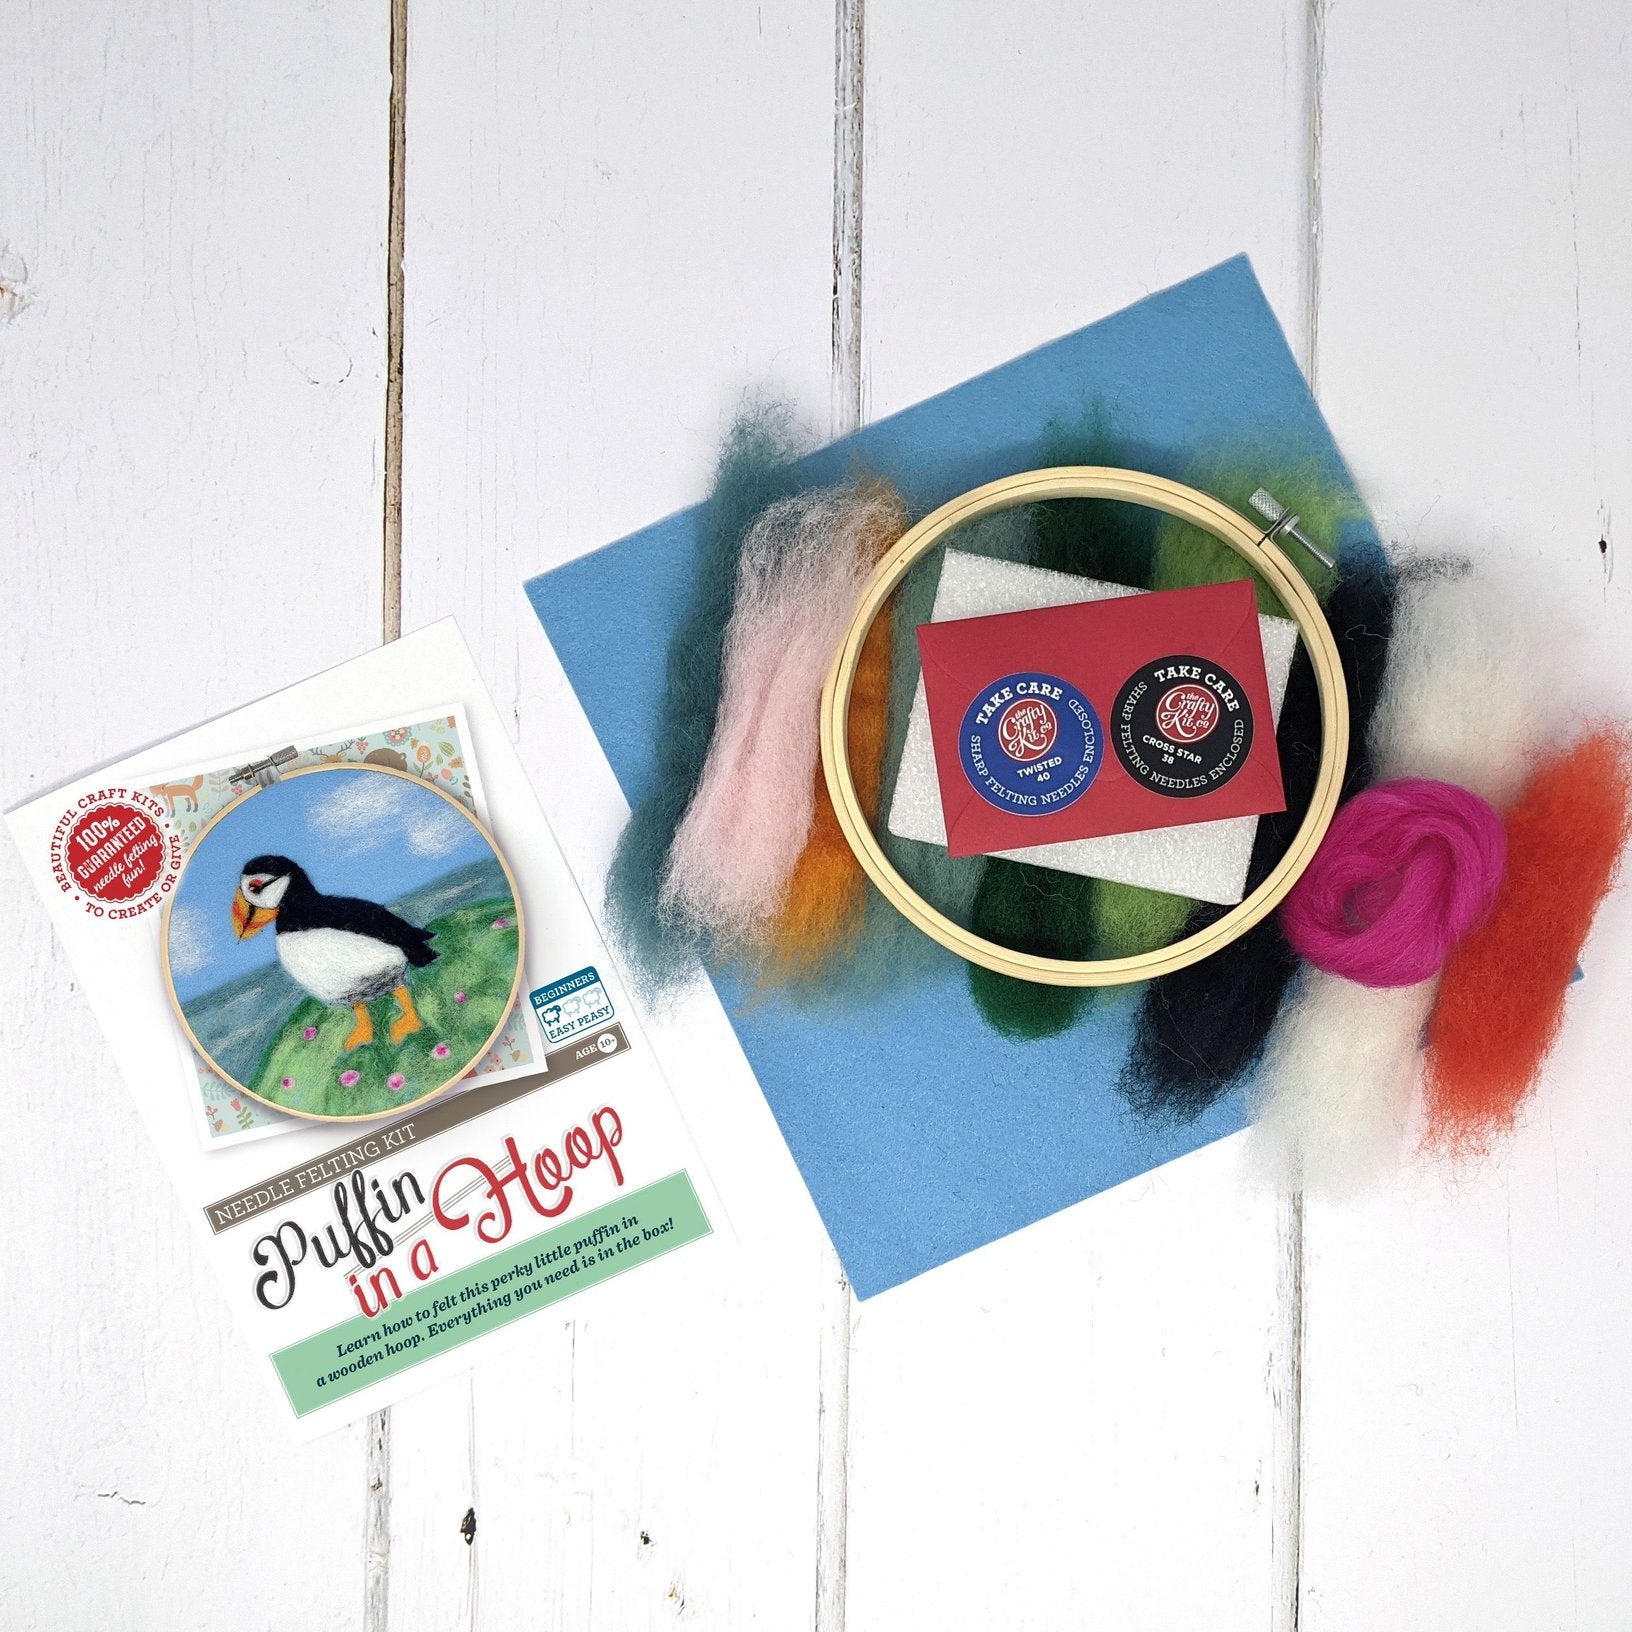 Puffin in a Hoop Needle Felting Kit The Crafty Kit Co. - Oscar & Libby's